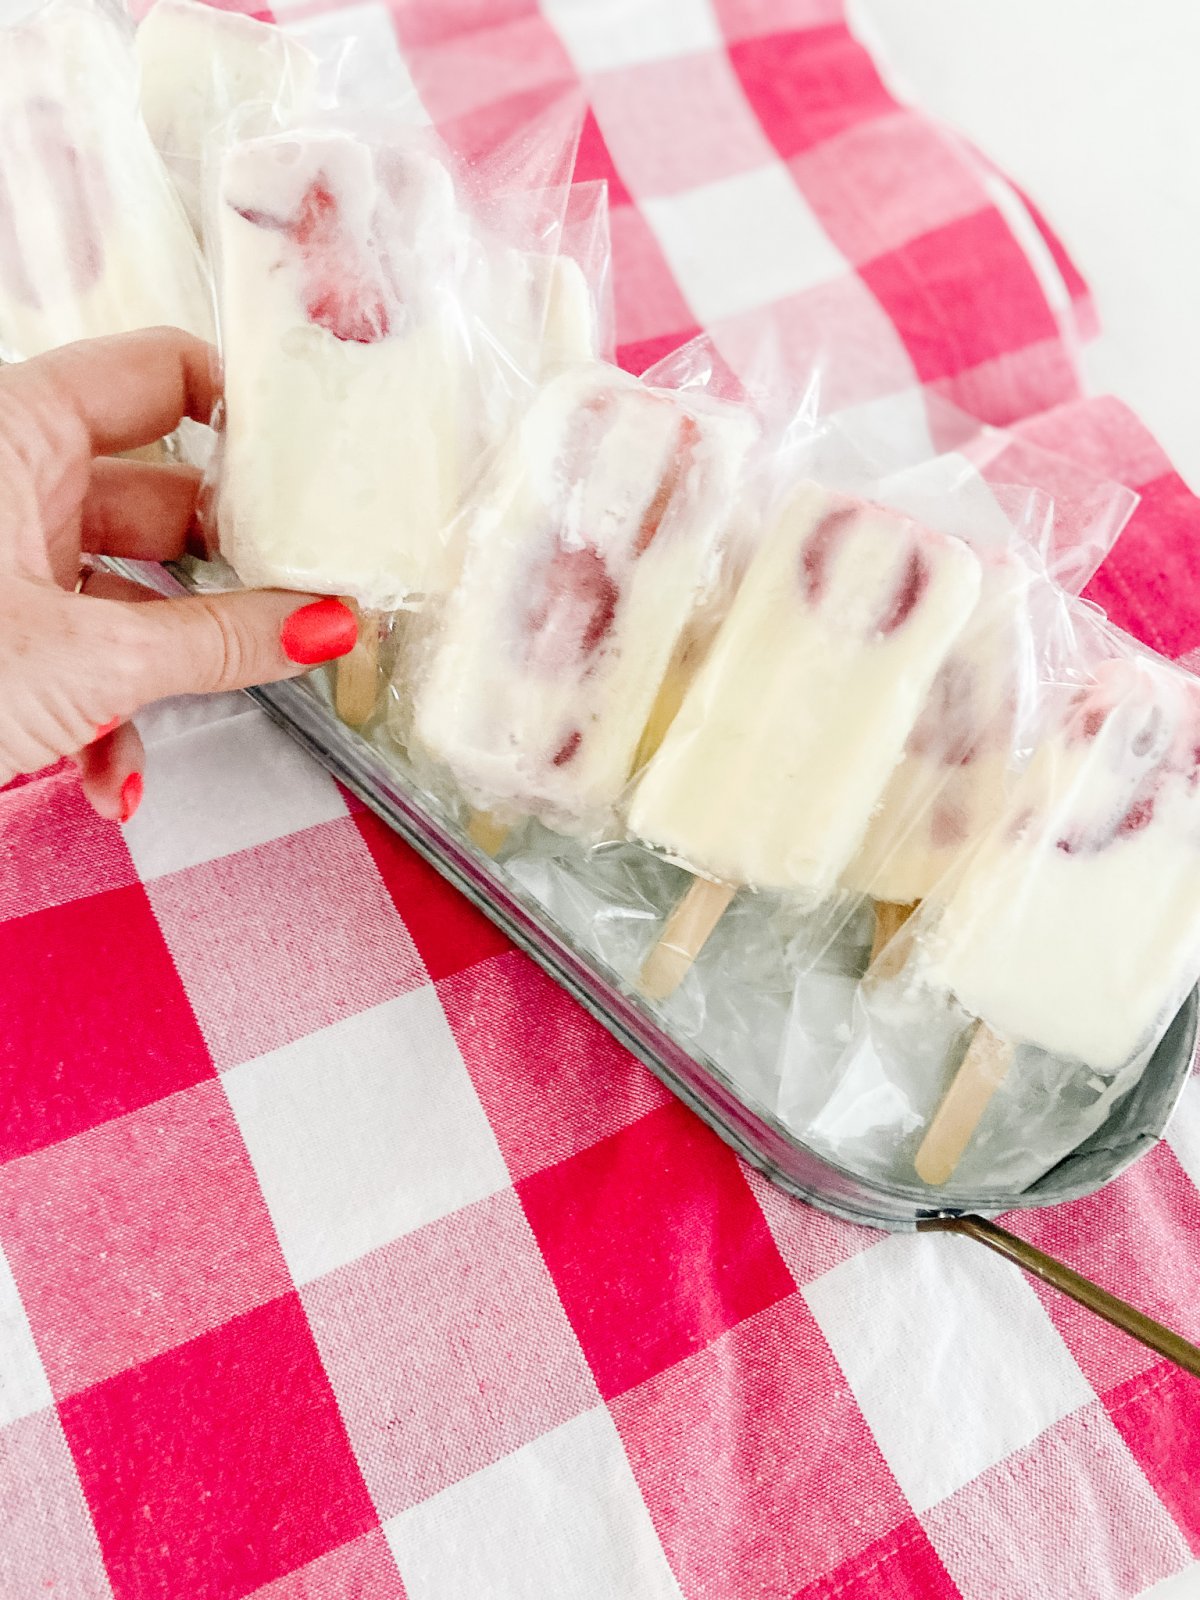 3-Ingredient strawberry Creamsicle Popsicles. The easiest and BEST low-carb strawberry popsicles taste like summer with just 3.5 net carbs per serving! 